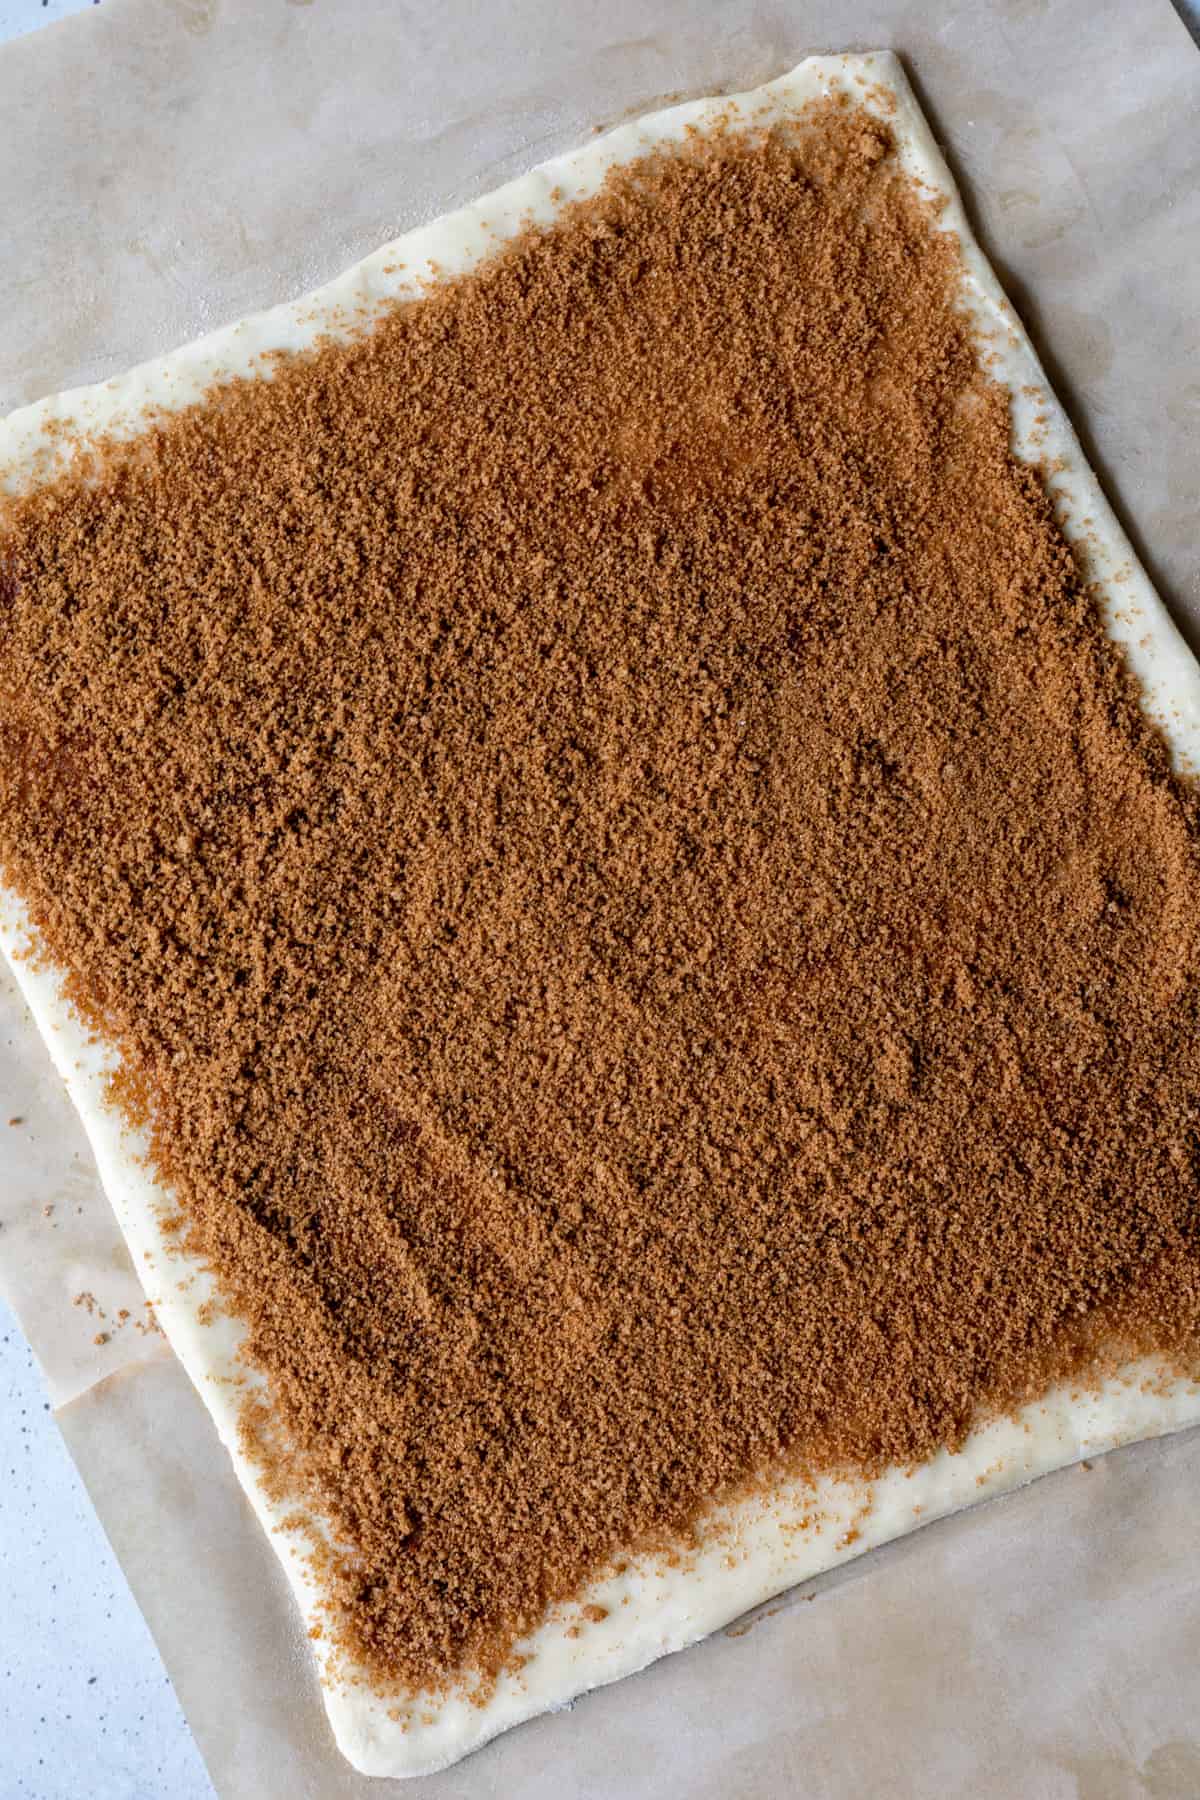 A puff pastry sheet coated in cinnamon sugar.